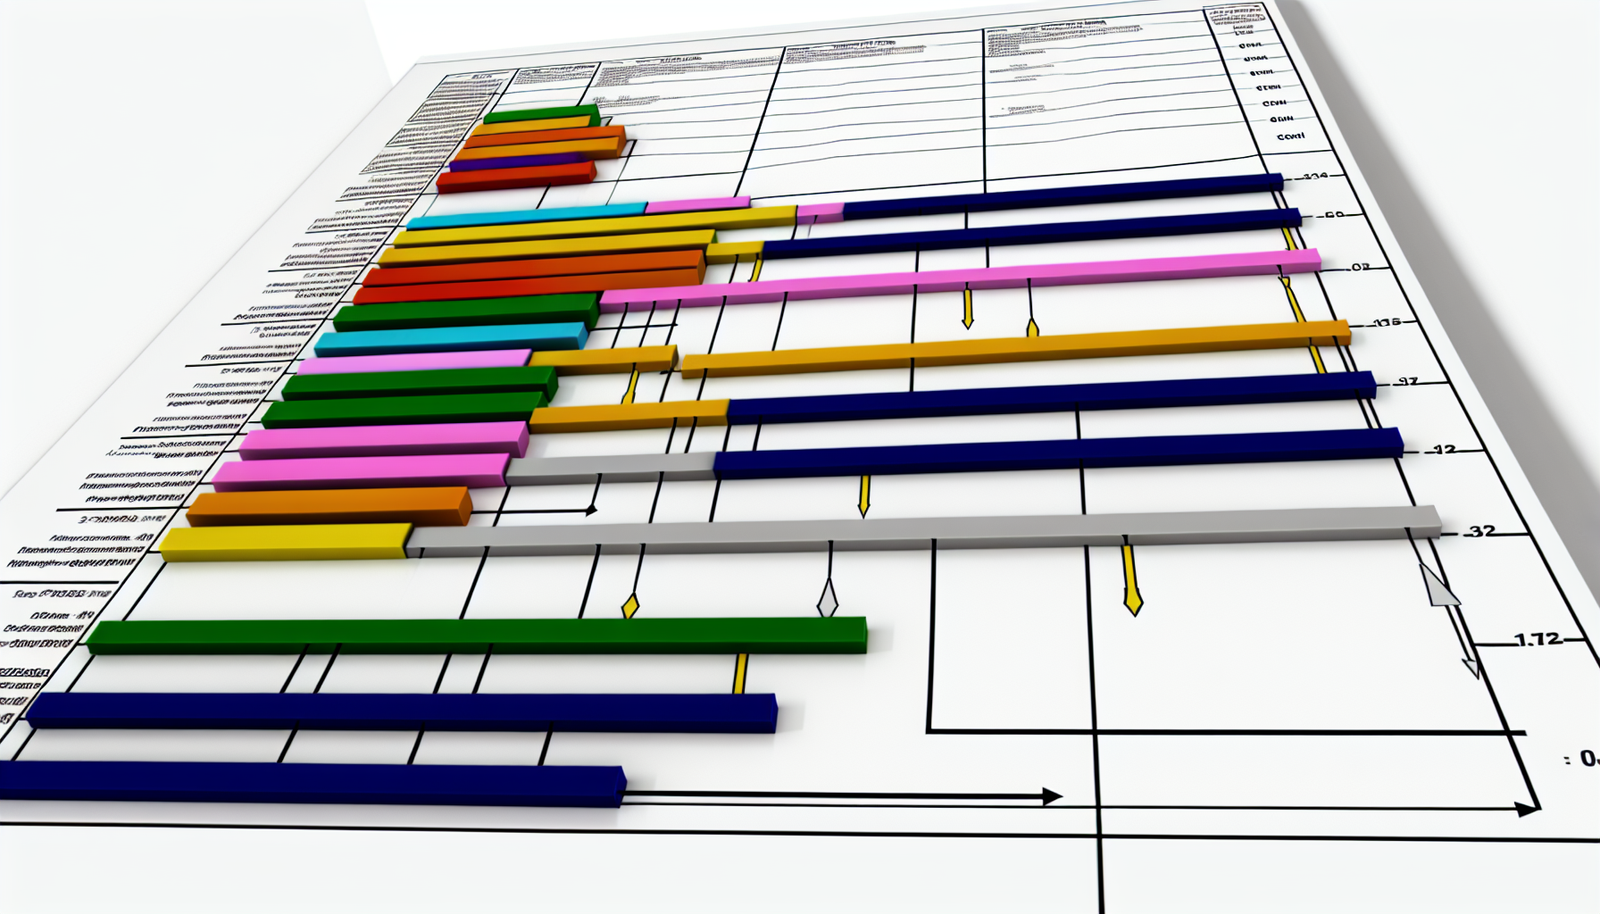 Gantt chart visualization with project timelines